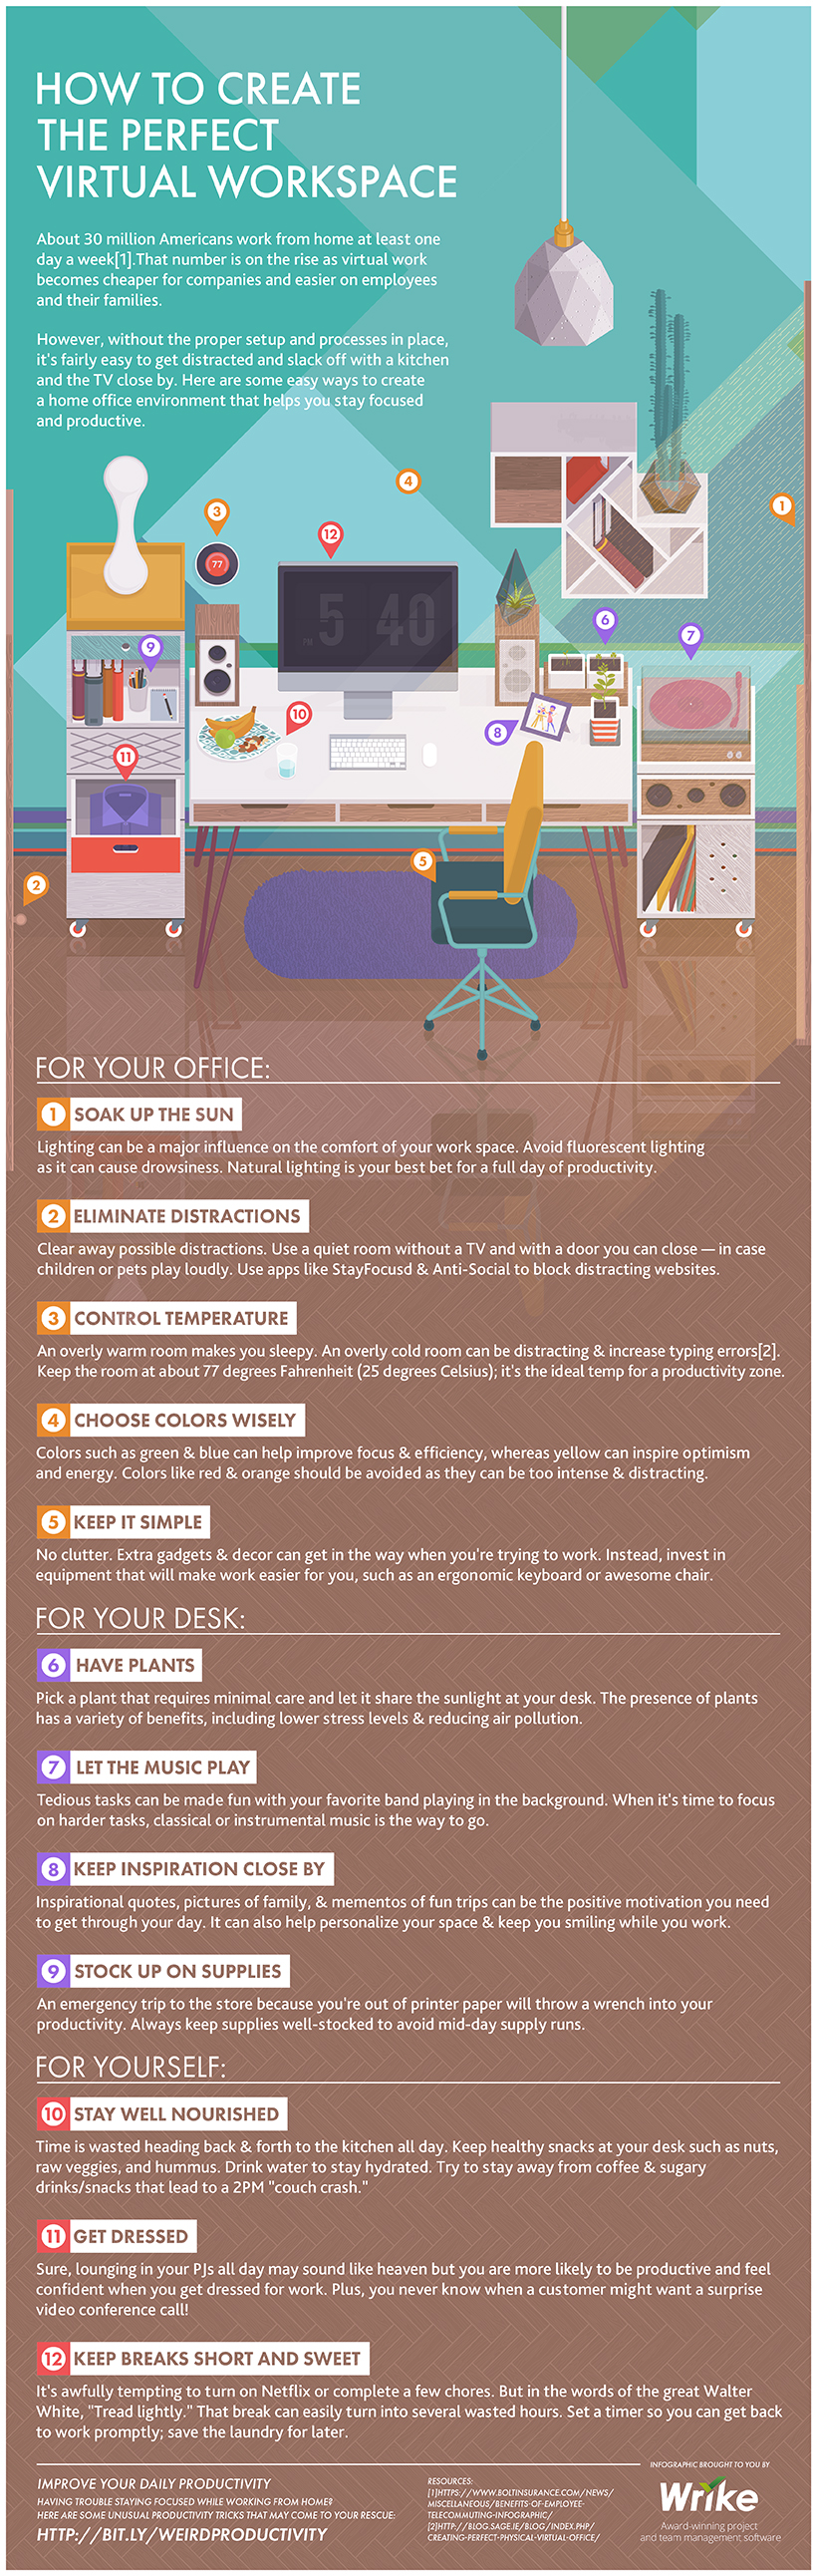 How to Create Your Perfect Remote Work Environment (#Infographic)